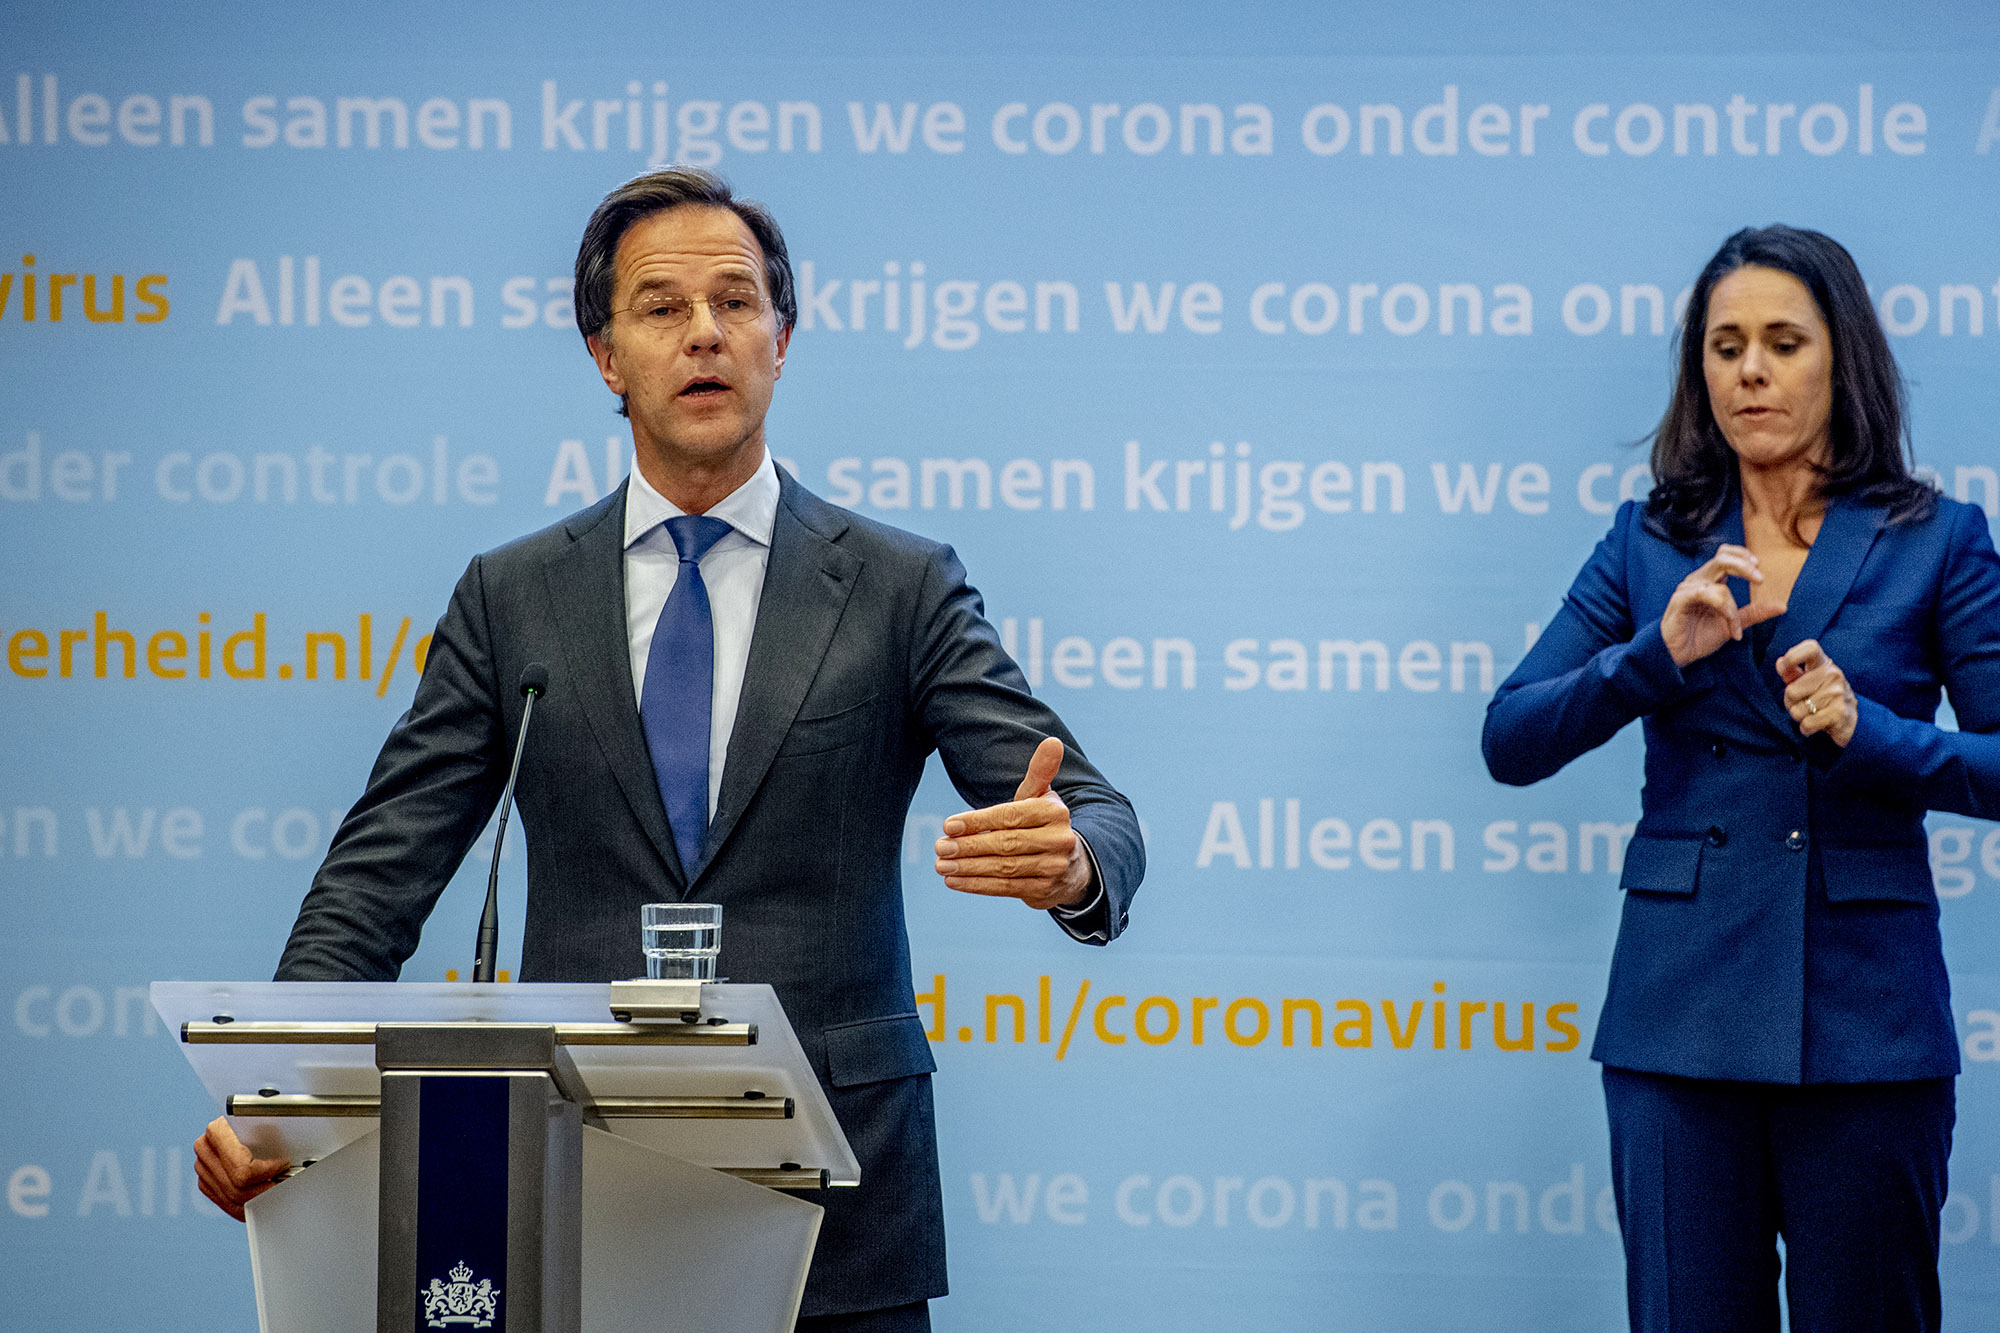 Dutch Prime Minister Mark Rutte speaks during a press conference at the Hague, Netherlands, on May 6. 